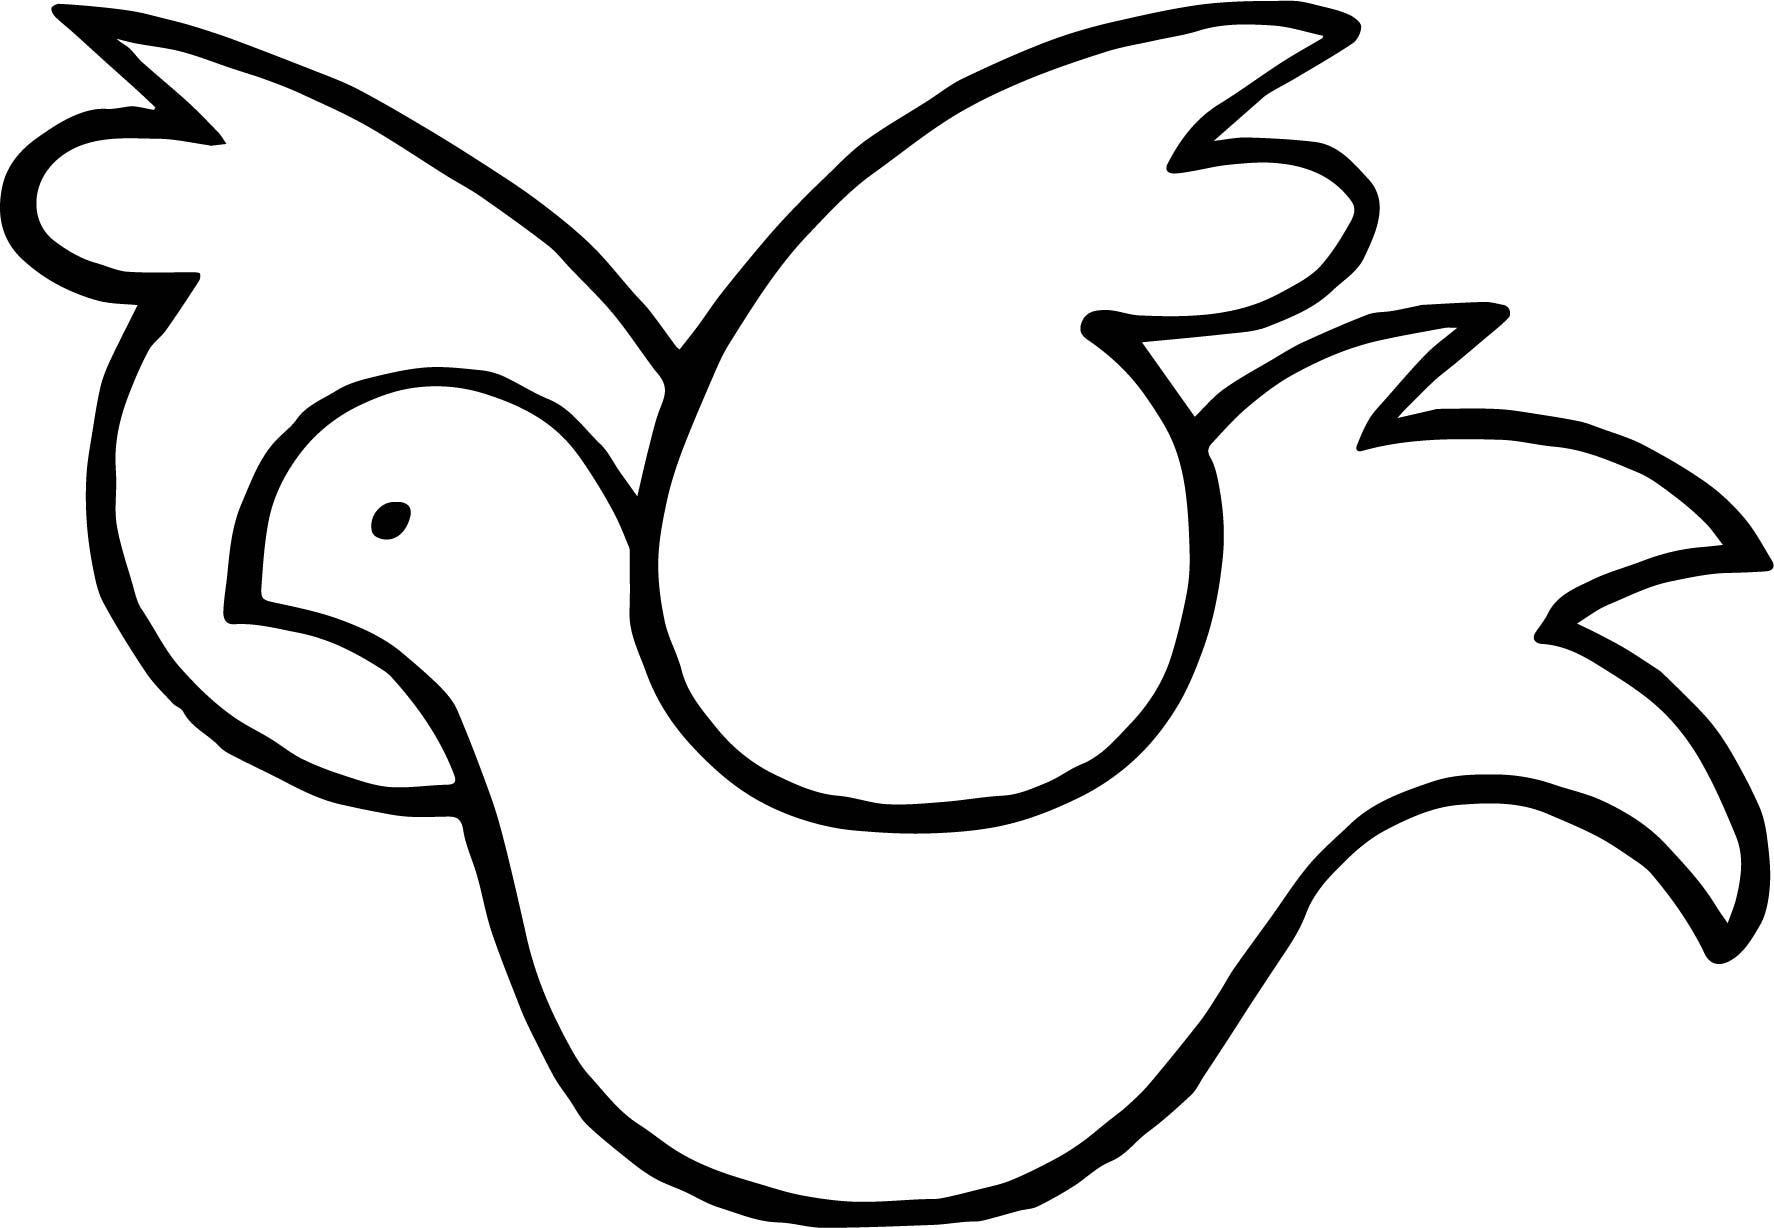 peace dove coloring page free printable peace sign coloring pages coloring pages dove page peace coloring 